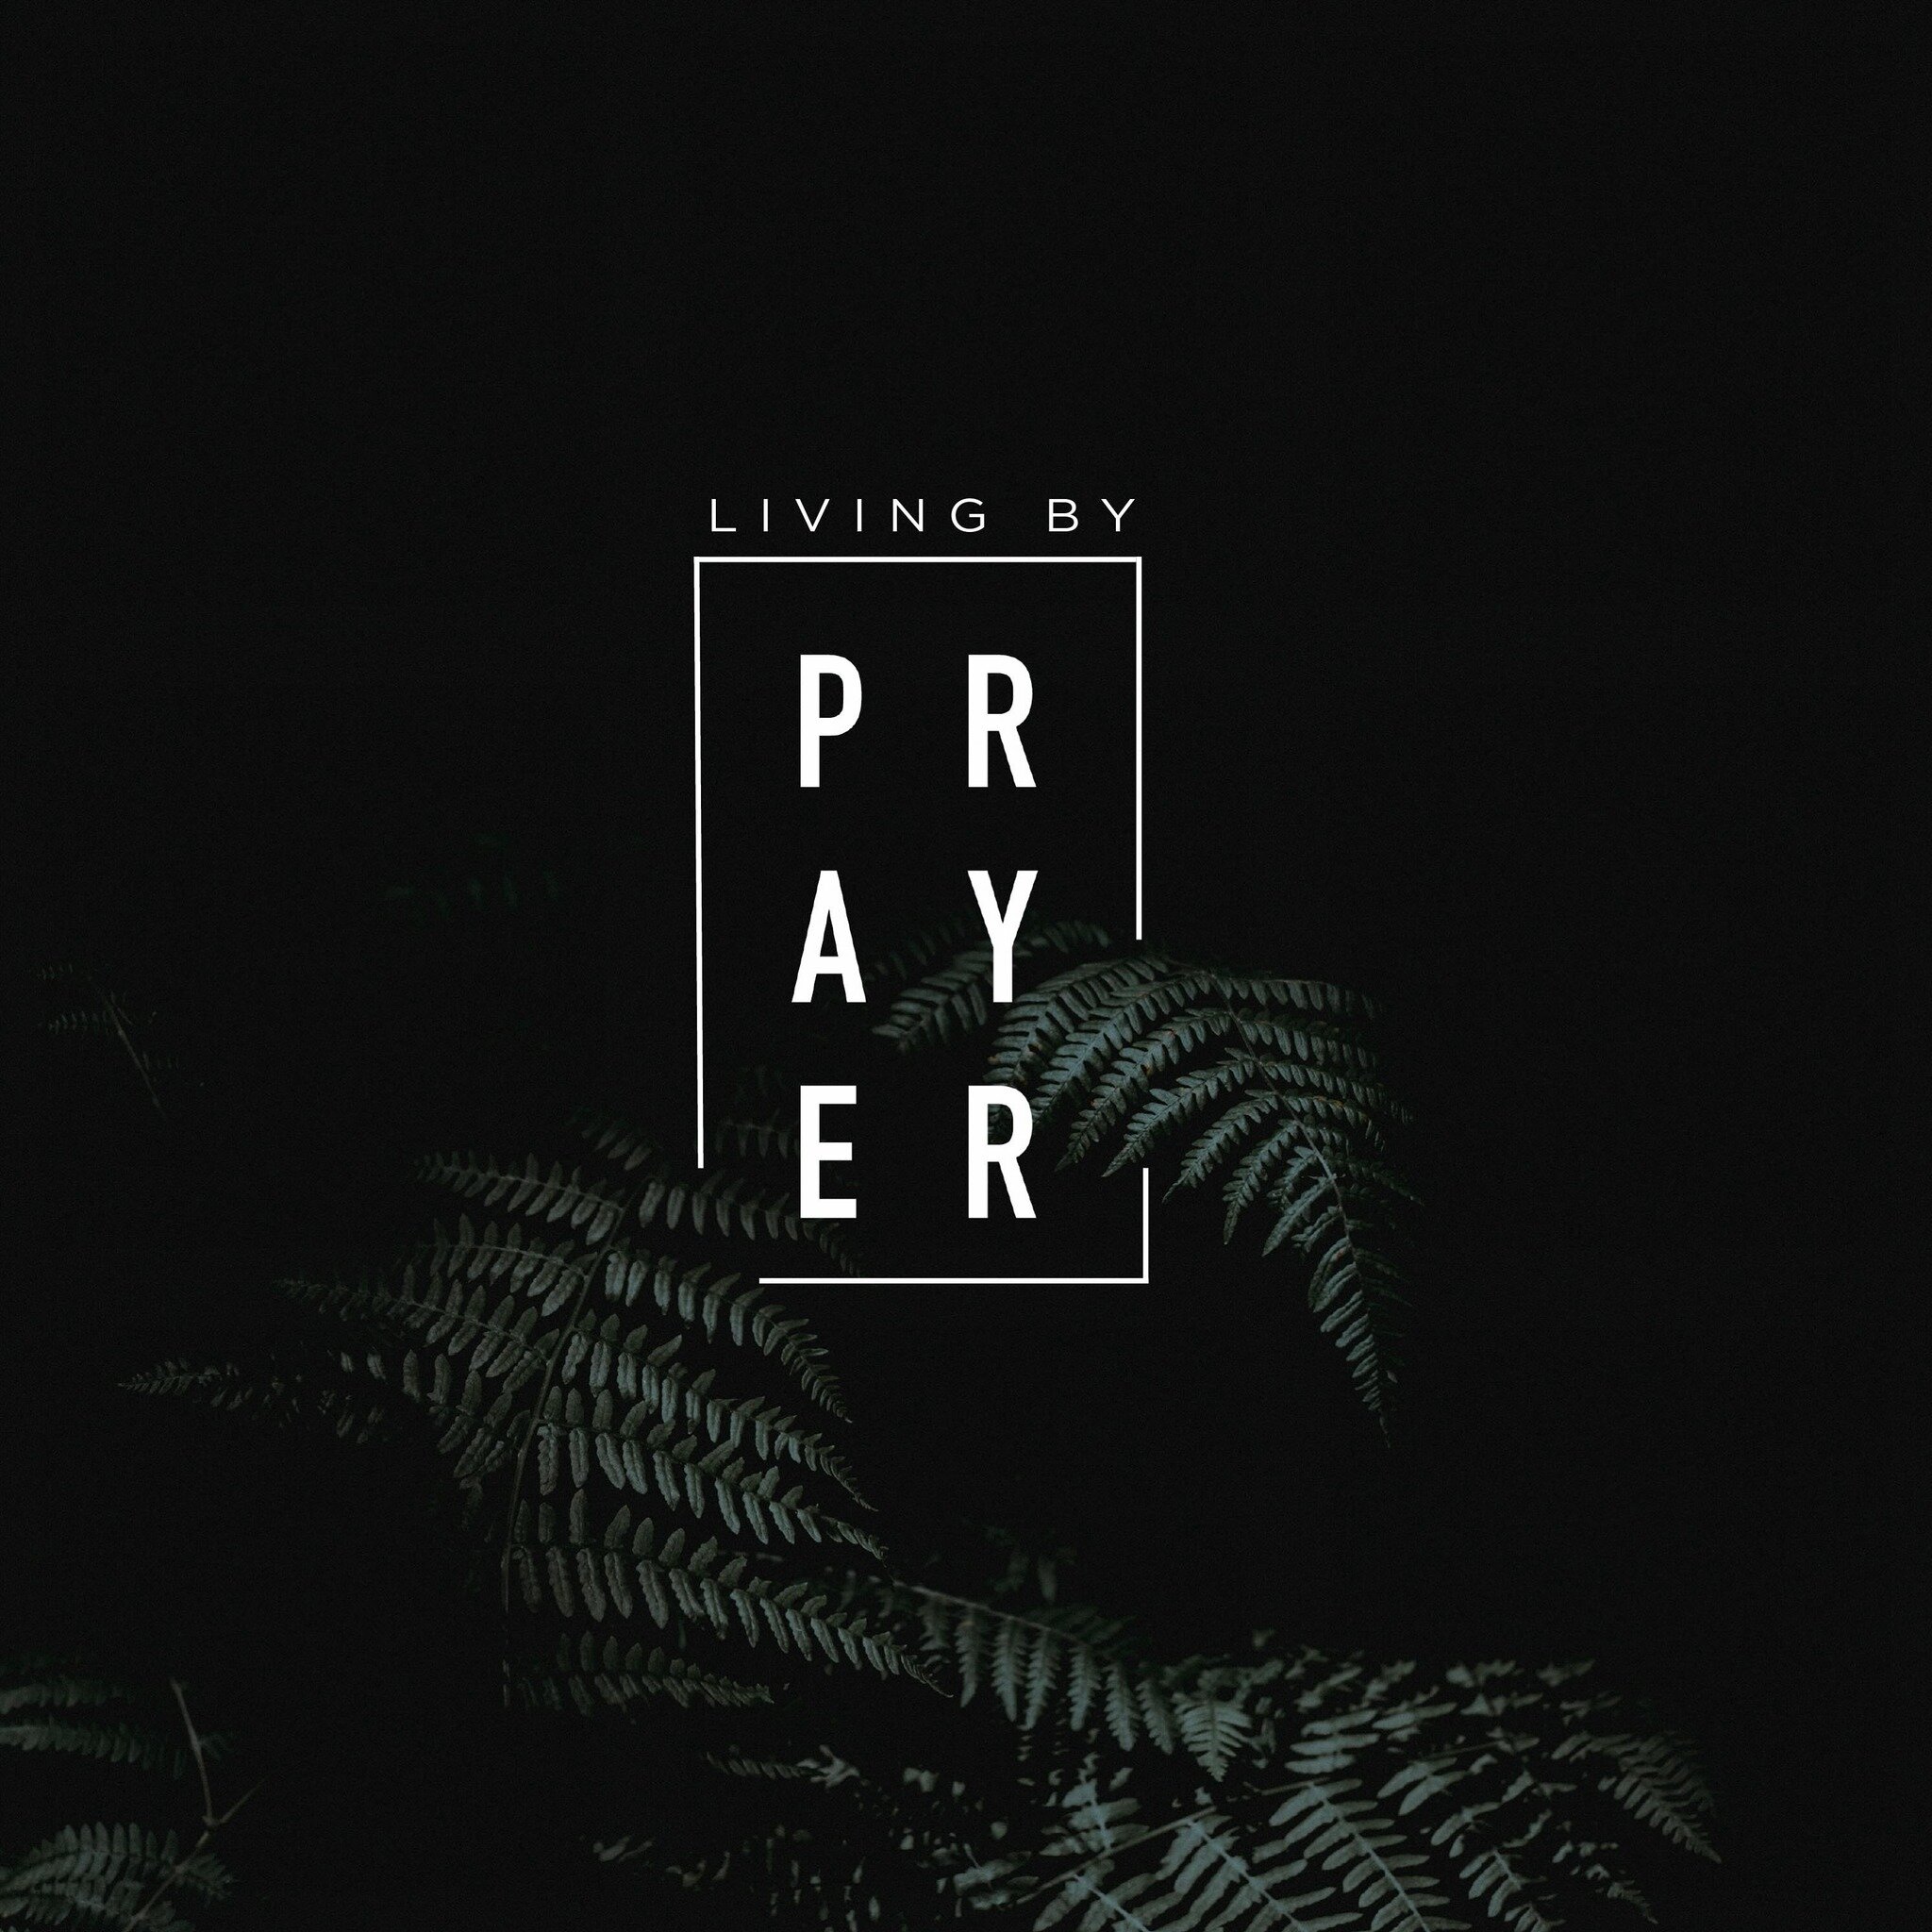 Living by prayer. It&rsquo;s what we should be doing continuously as believers (1 Thessalonians 5:17). Yet many of us often struggle with this. 

This Sunday Pastor Mike will share the final message in our &ldquo;Who We Are&rdquo; sermon series and f